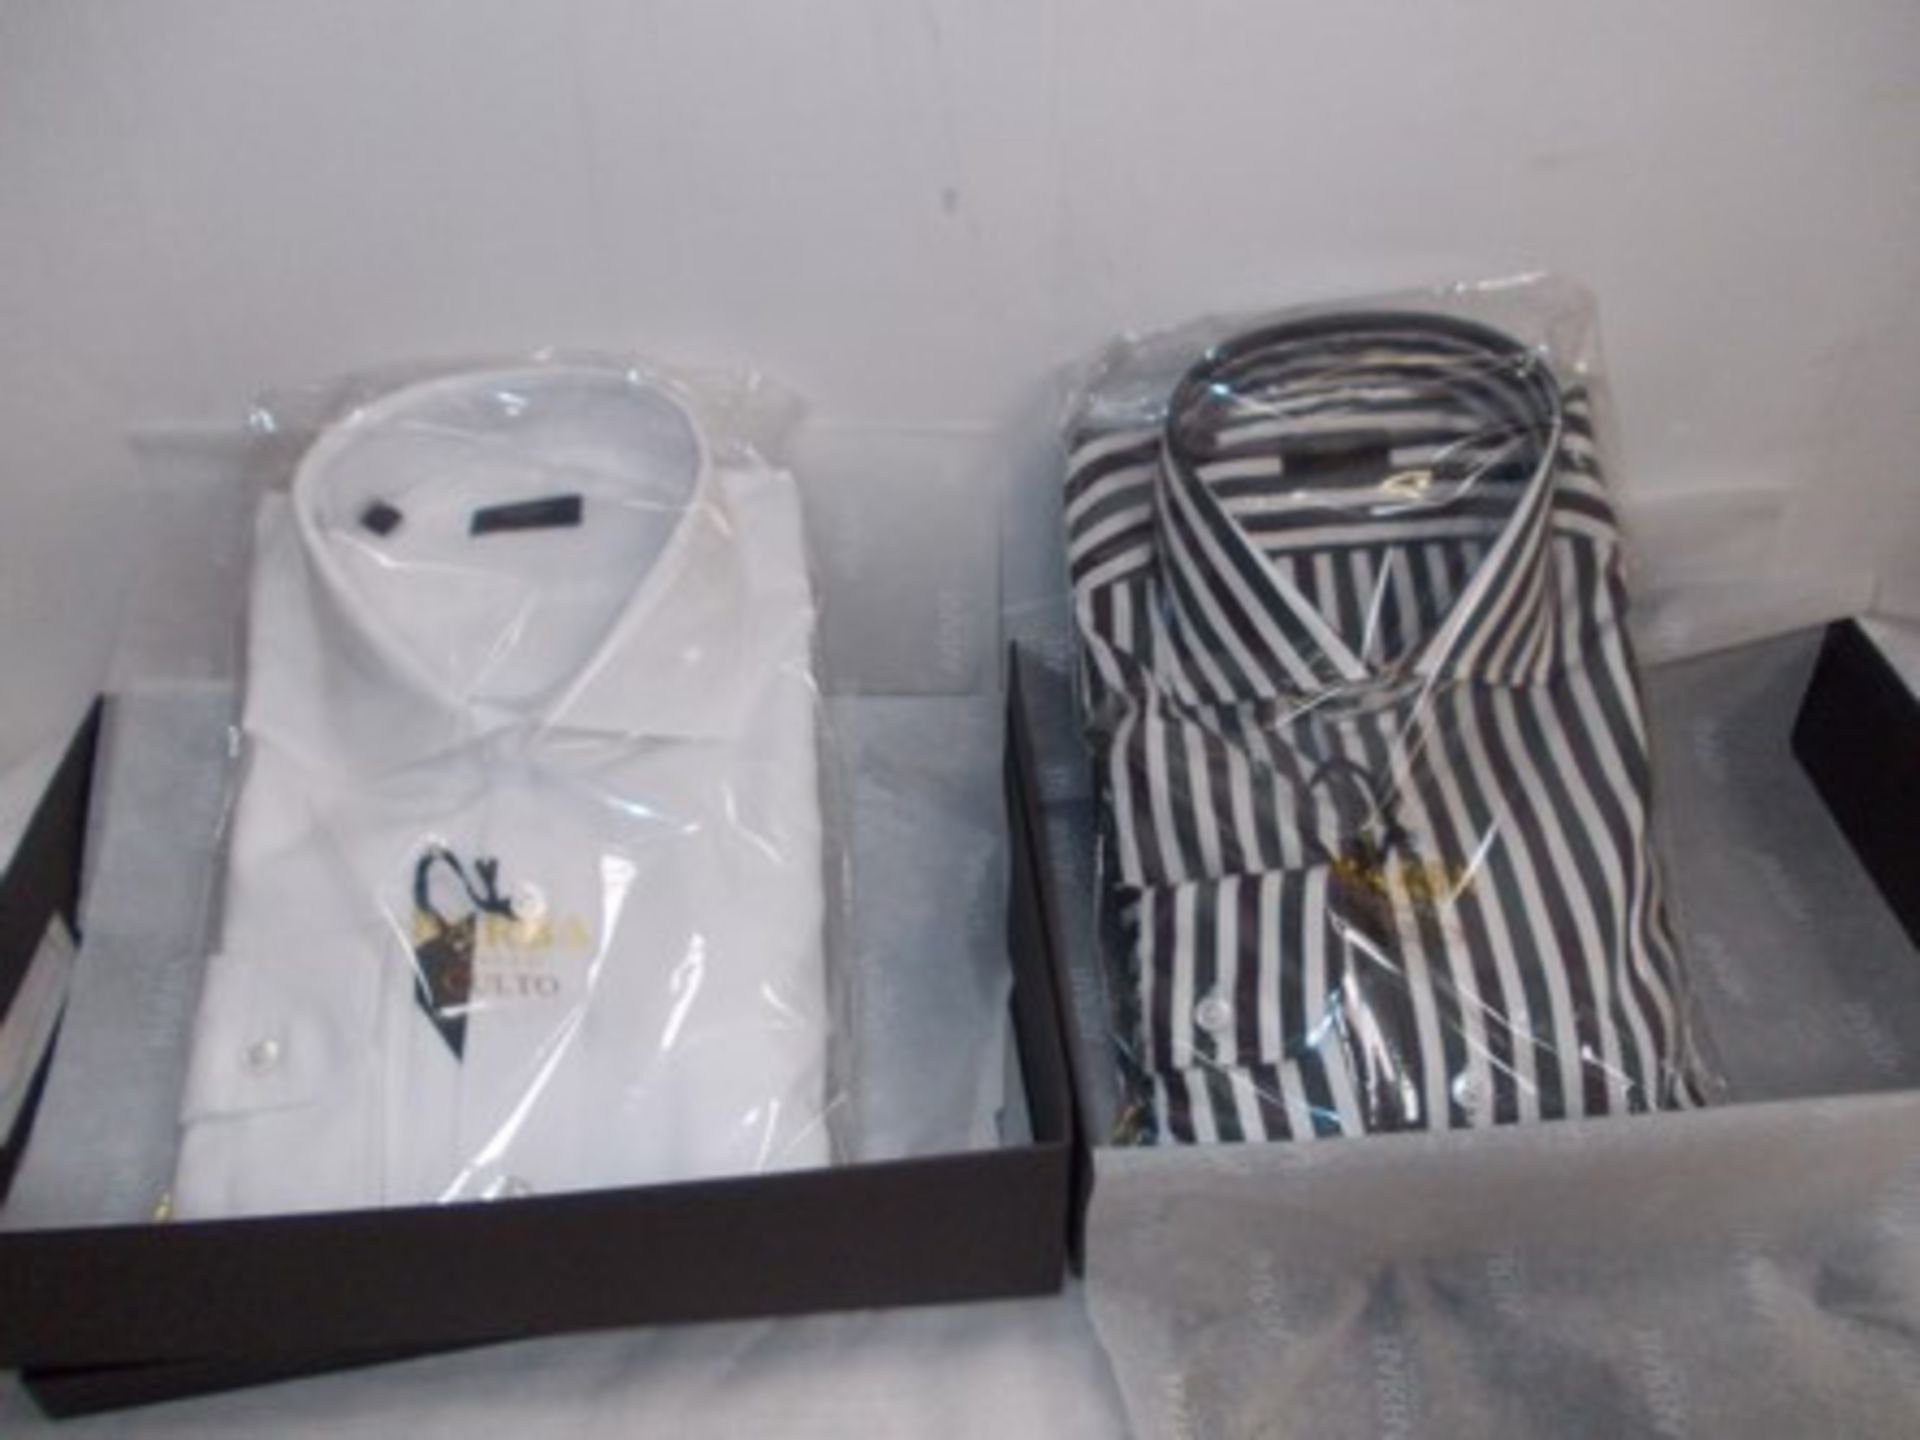 4 x Barba Napoli men's shirts comprising 3 x white shirts, 1 x size 39, and 2 x size 40 and 1 x